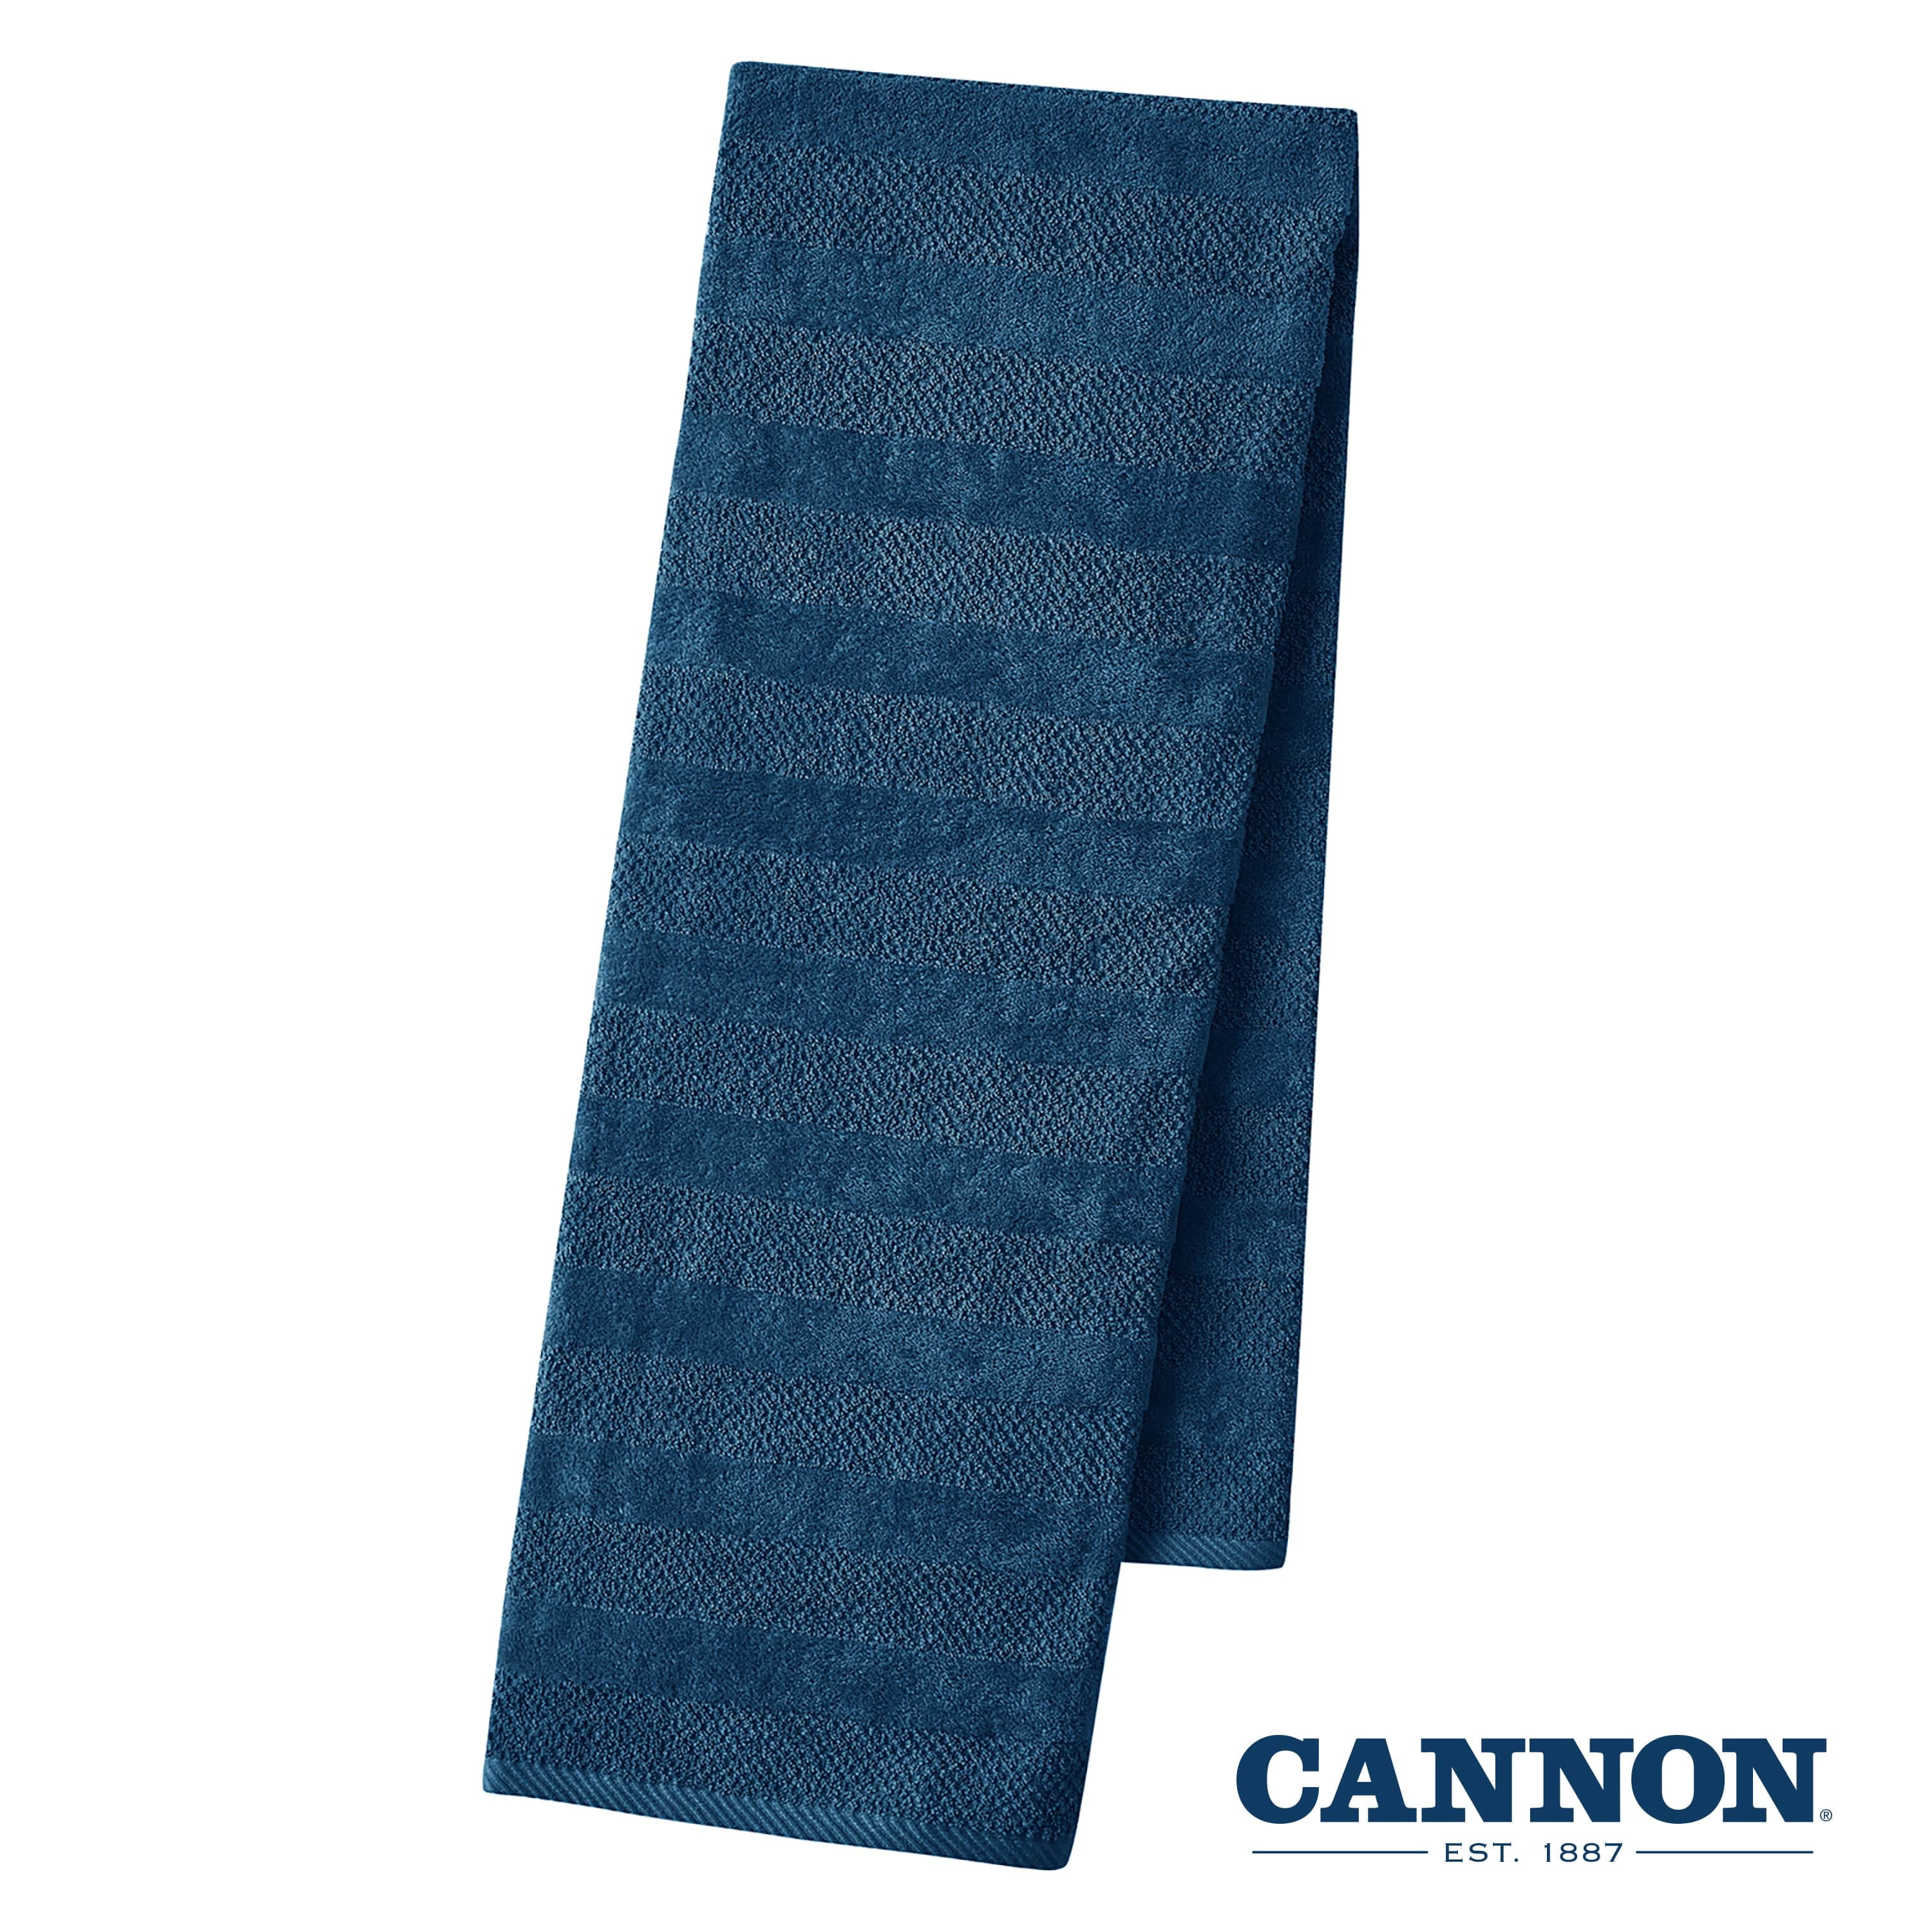 Cannon Shear Bliss Lightweight Quick Dry Cotton 2 Pack Bath Towels for Adults, Plum